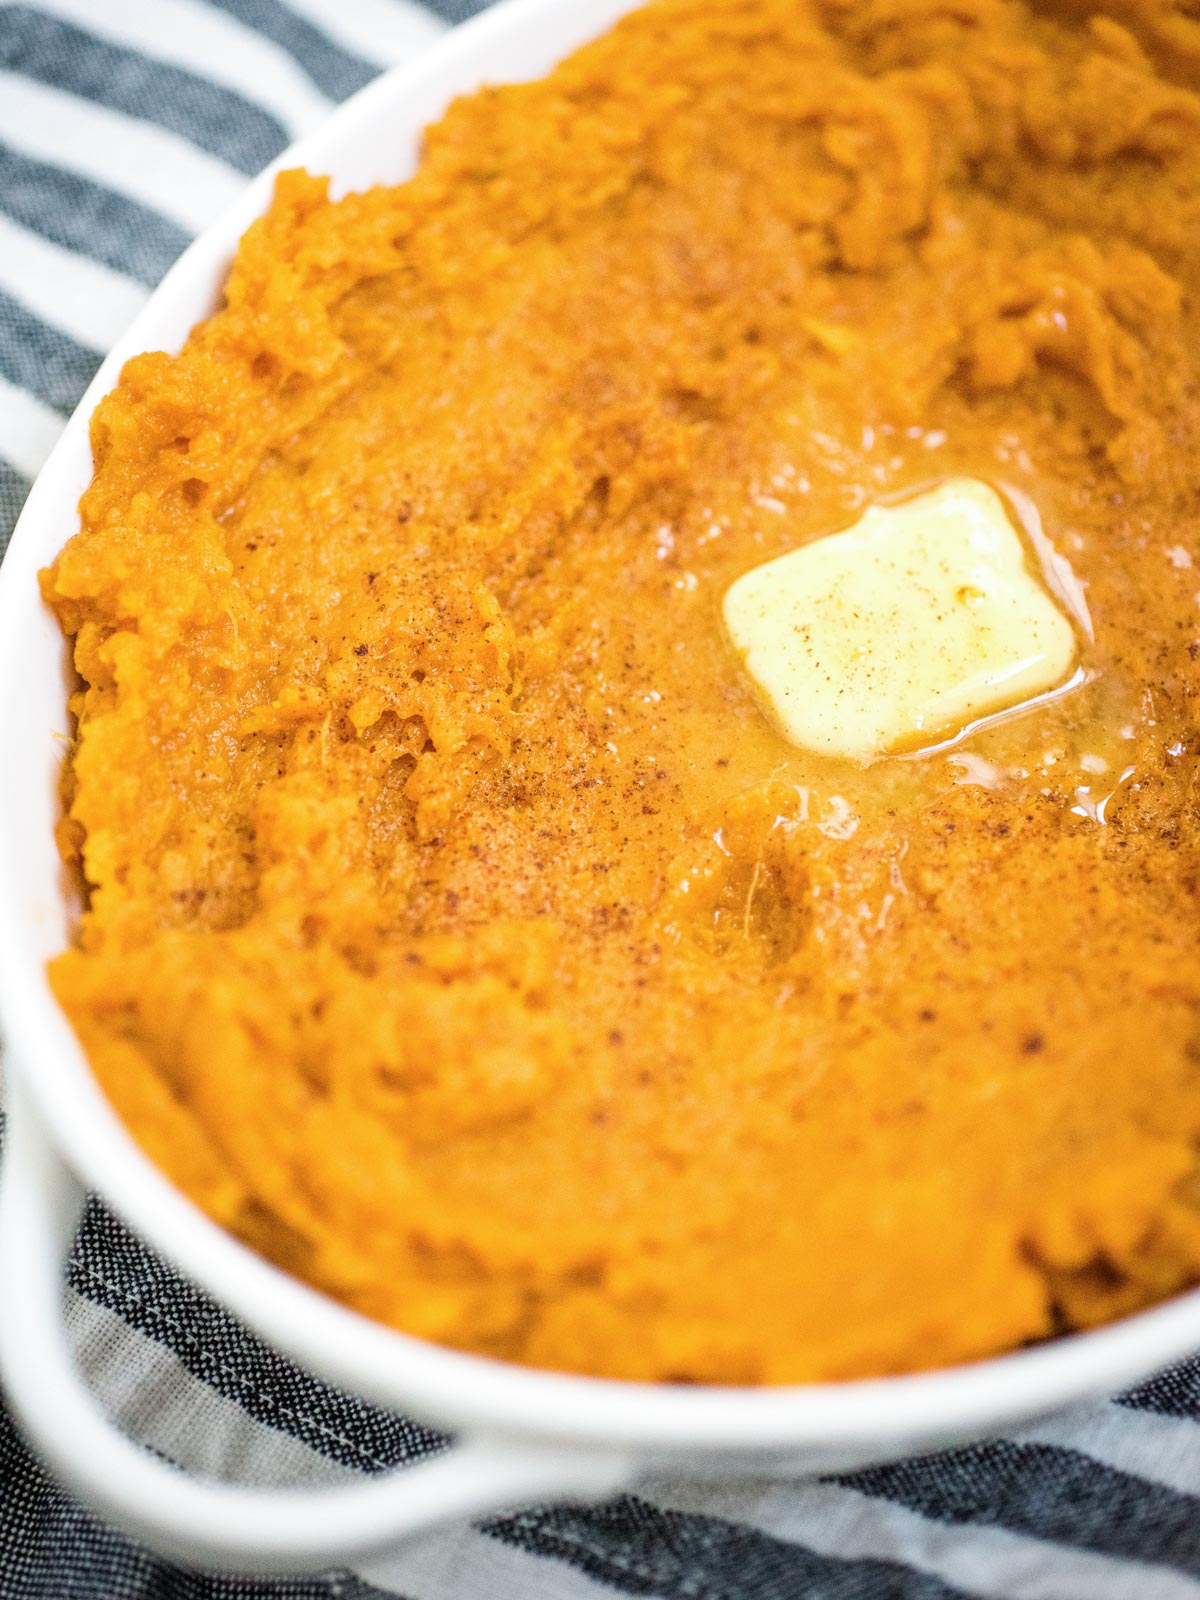 butter melting on top of mashed sweet potatoes in a white baking dish